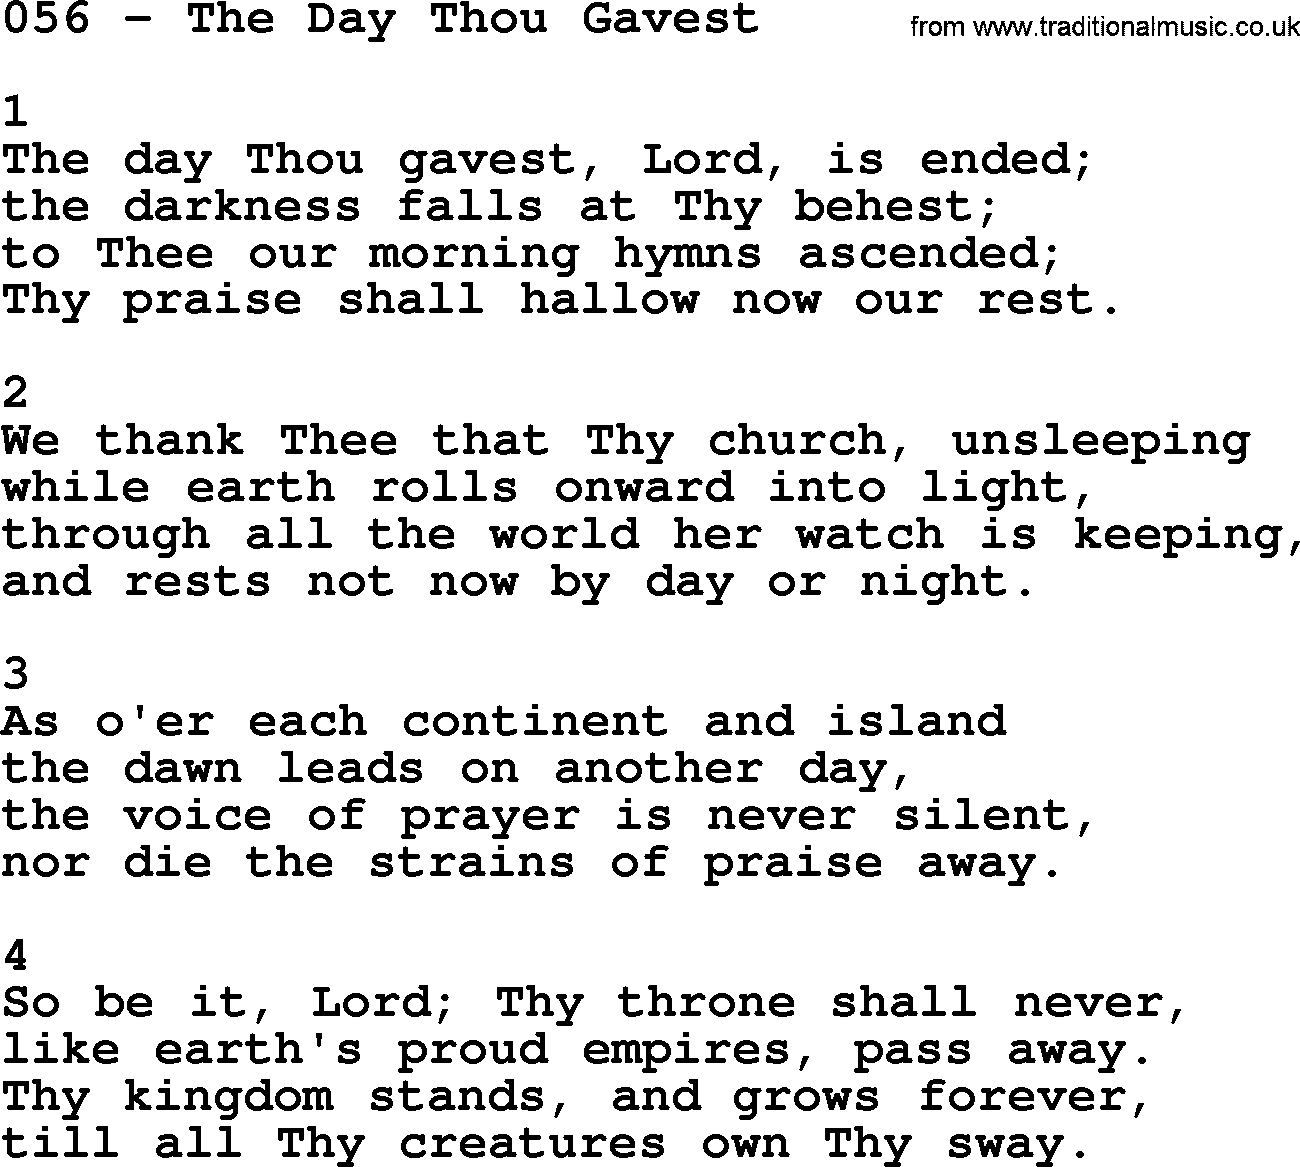 Complete Adventis Hymnal, title: 056-The Day Thou Gavest, with lyrics, midi, mp3, powerpoints(PPT) and PDF,